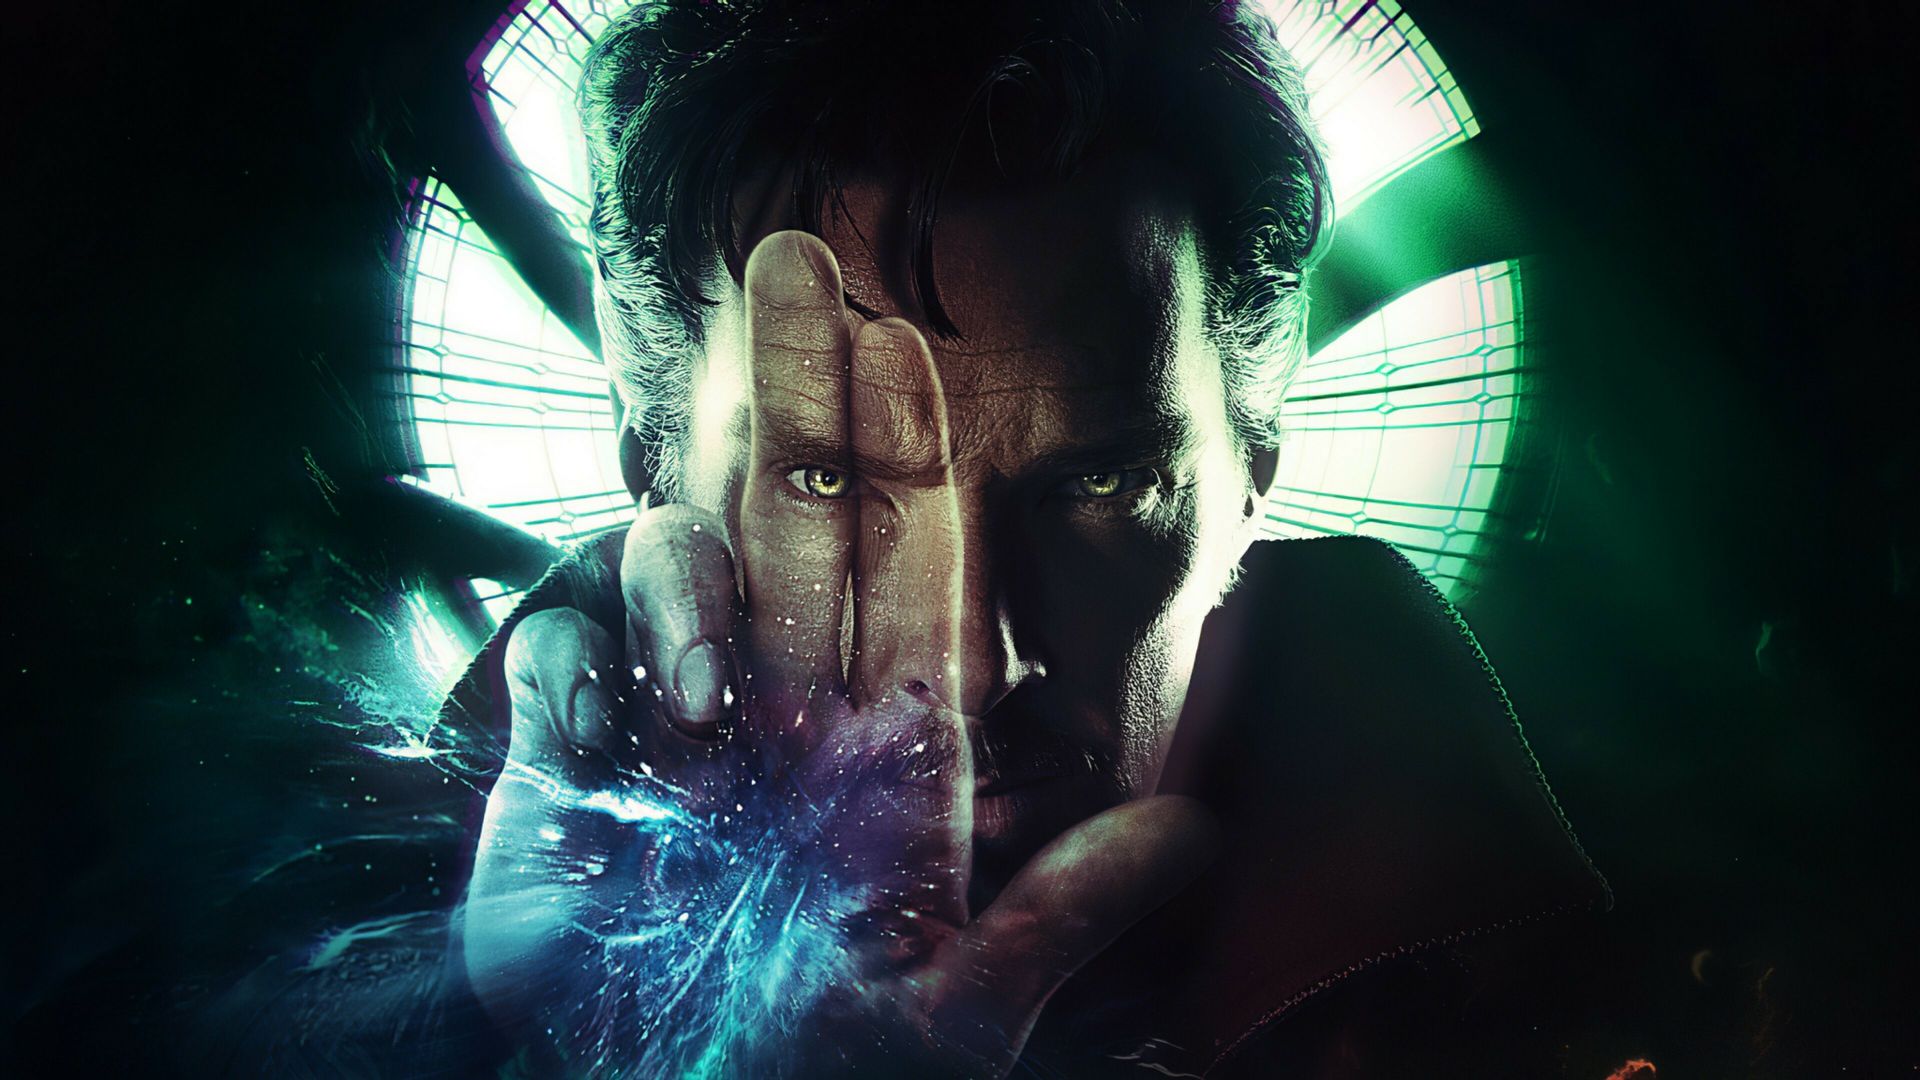 Doctor strange in the multiverse of madness, fantasy marvel movie, 2022 wallpaper, HD image, picture, background, f37de4